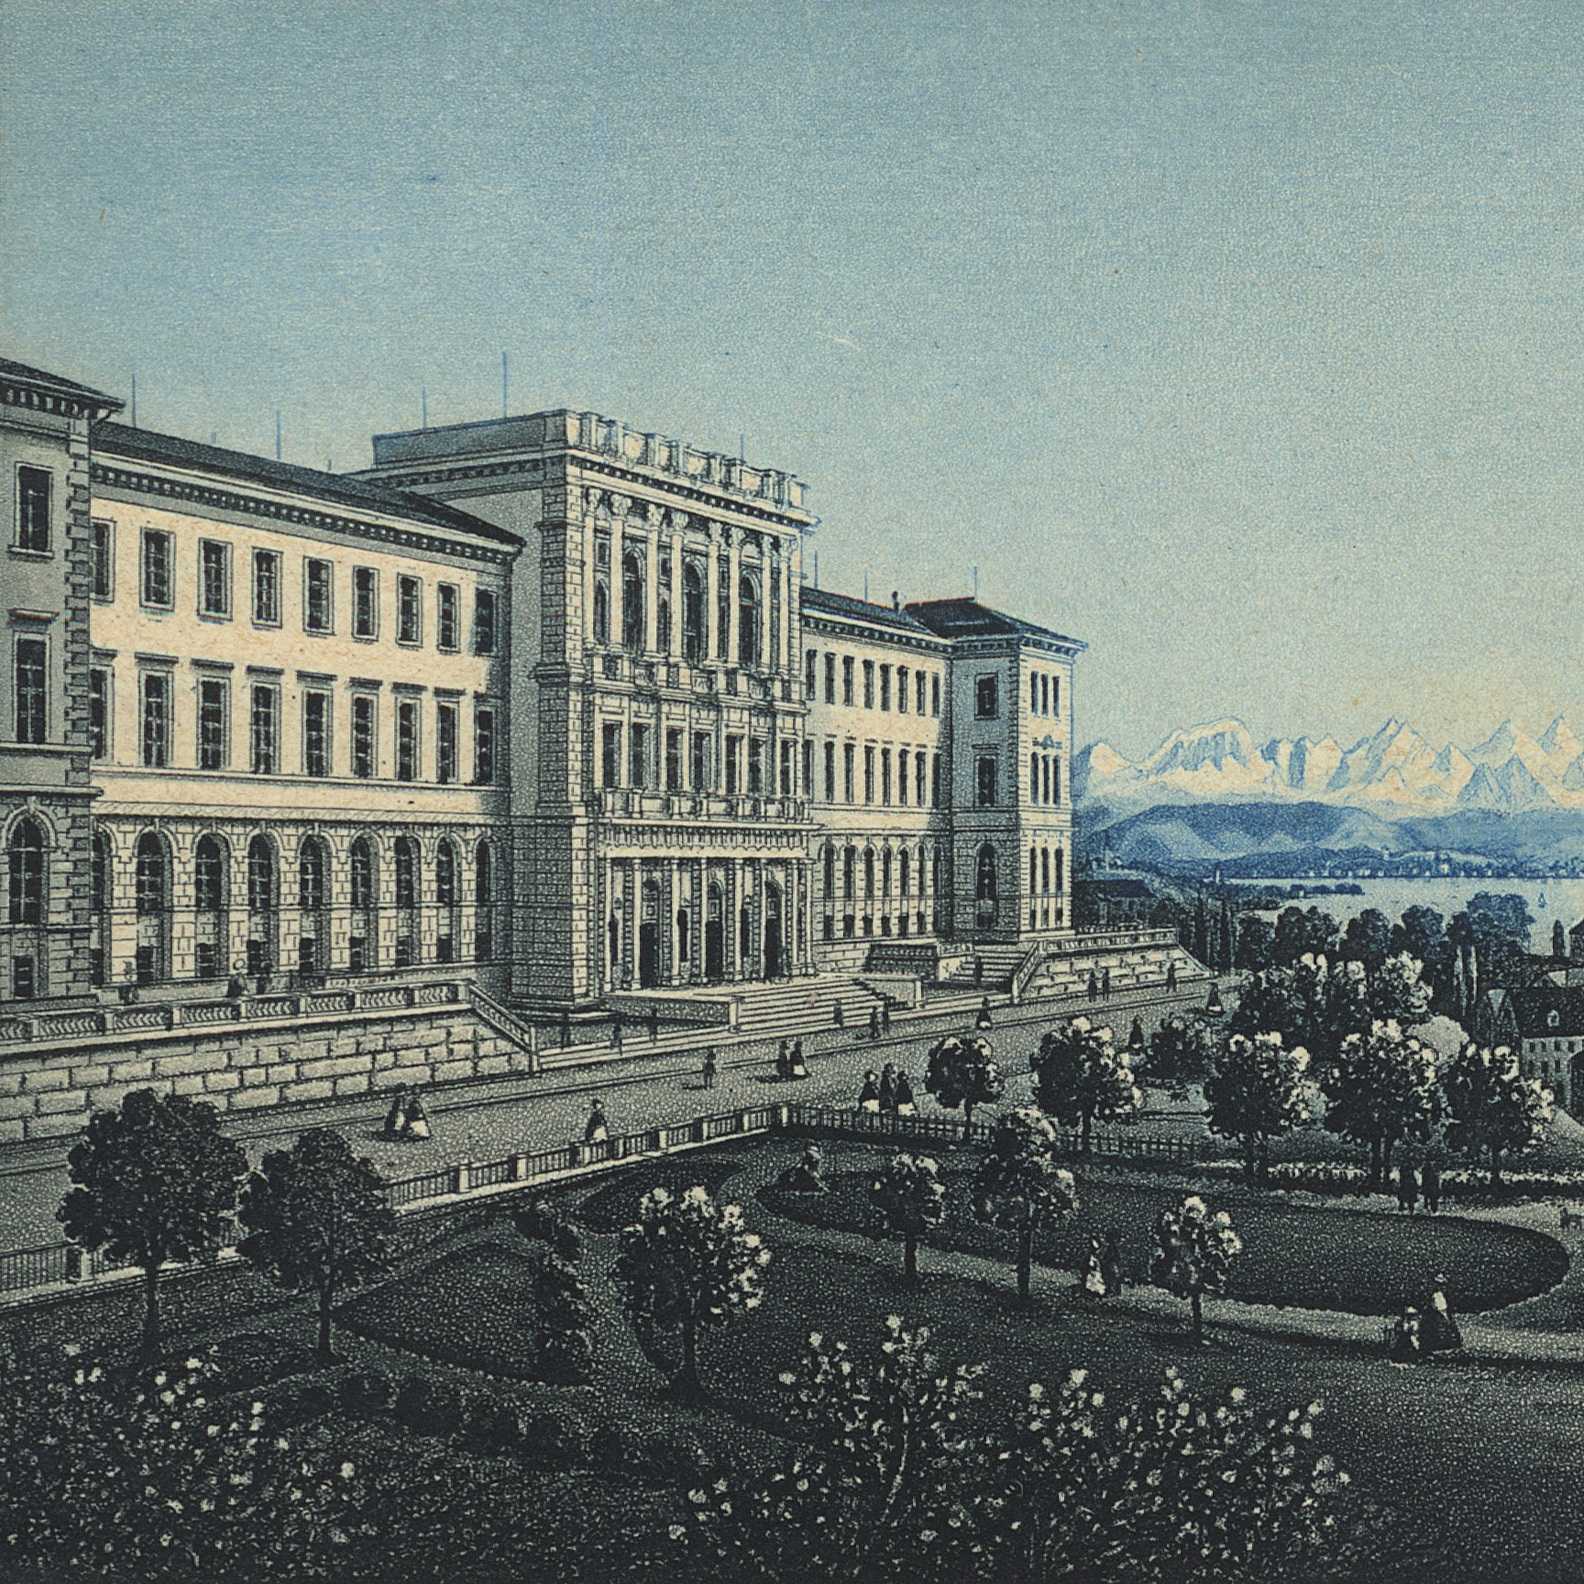 Main Building at ETH Zurich in the 19th century